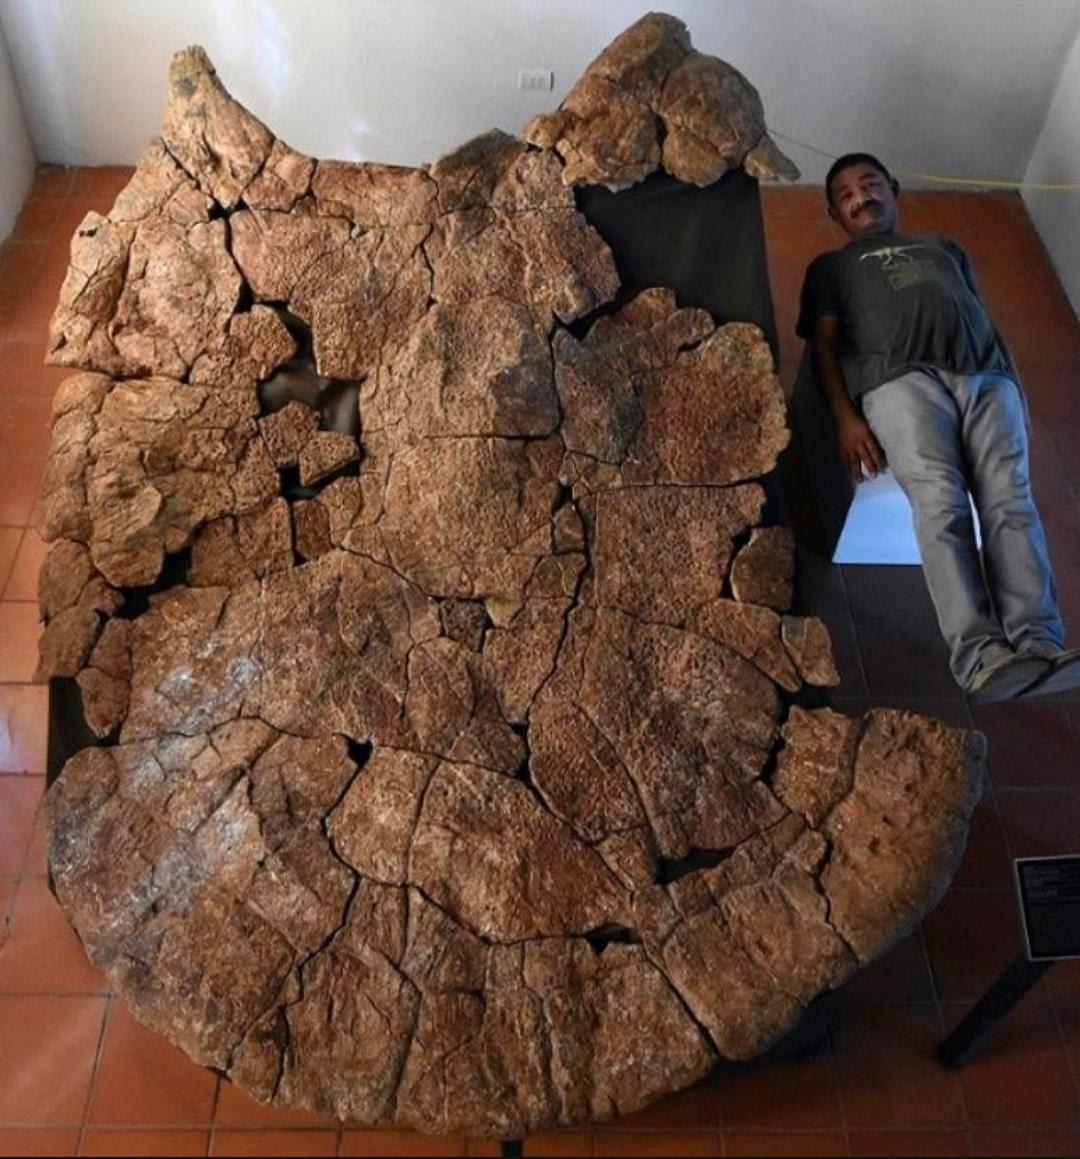 Fossils of a turtle the size of a car have been unearthed in South America. Carlos for scale